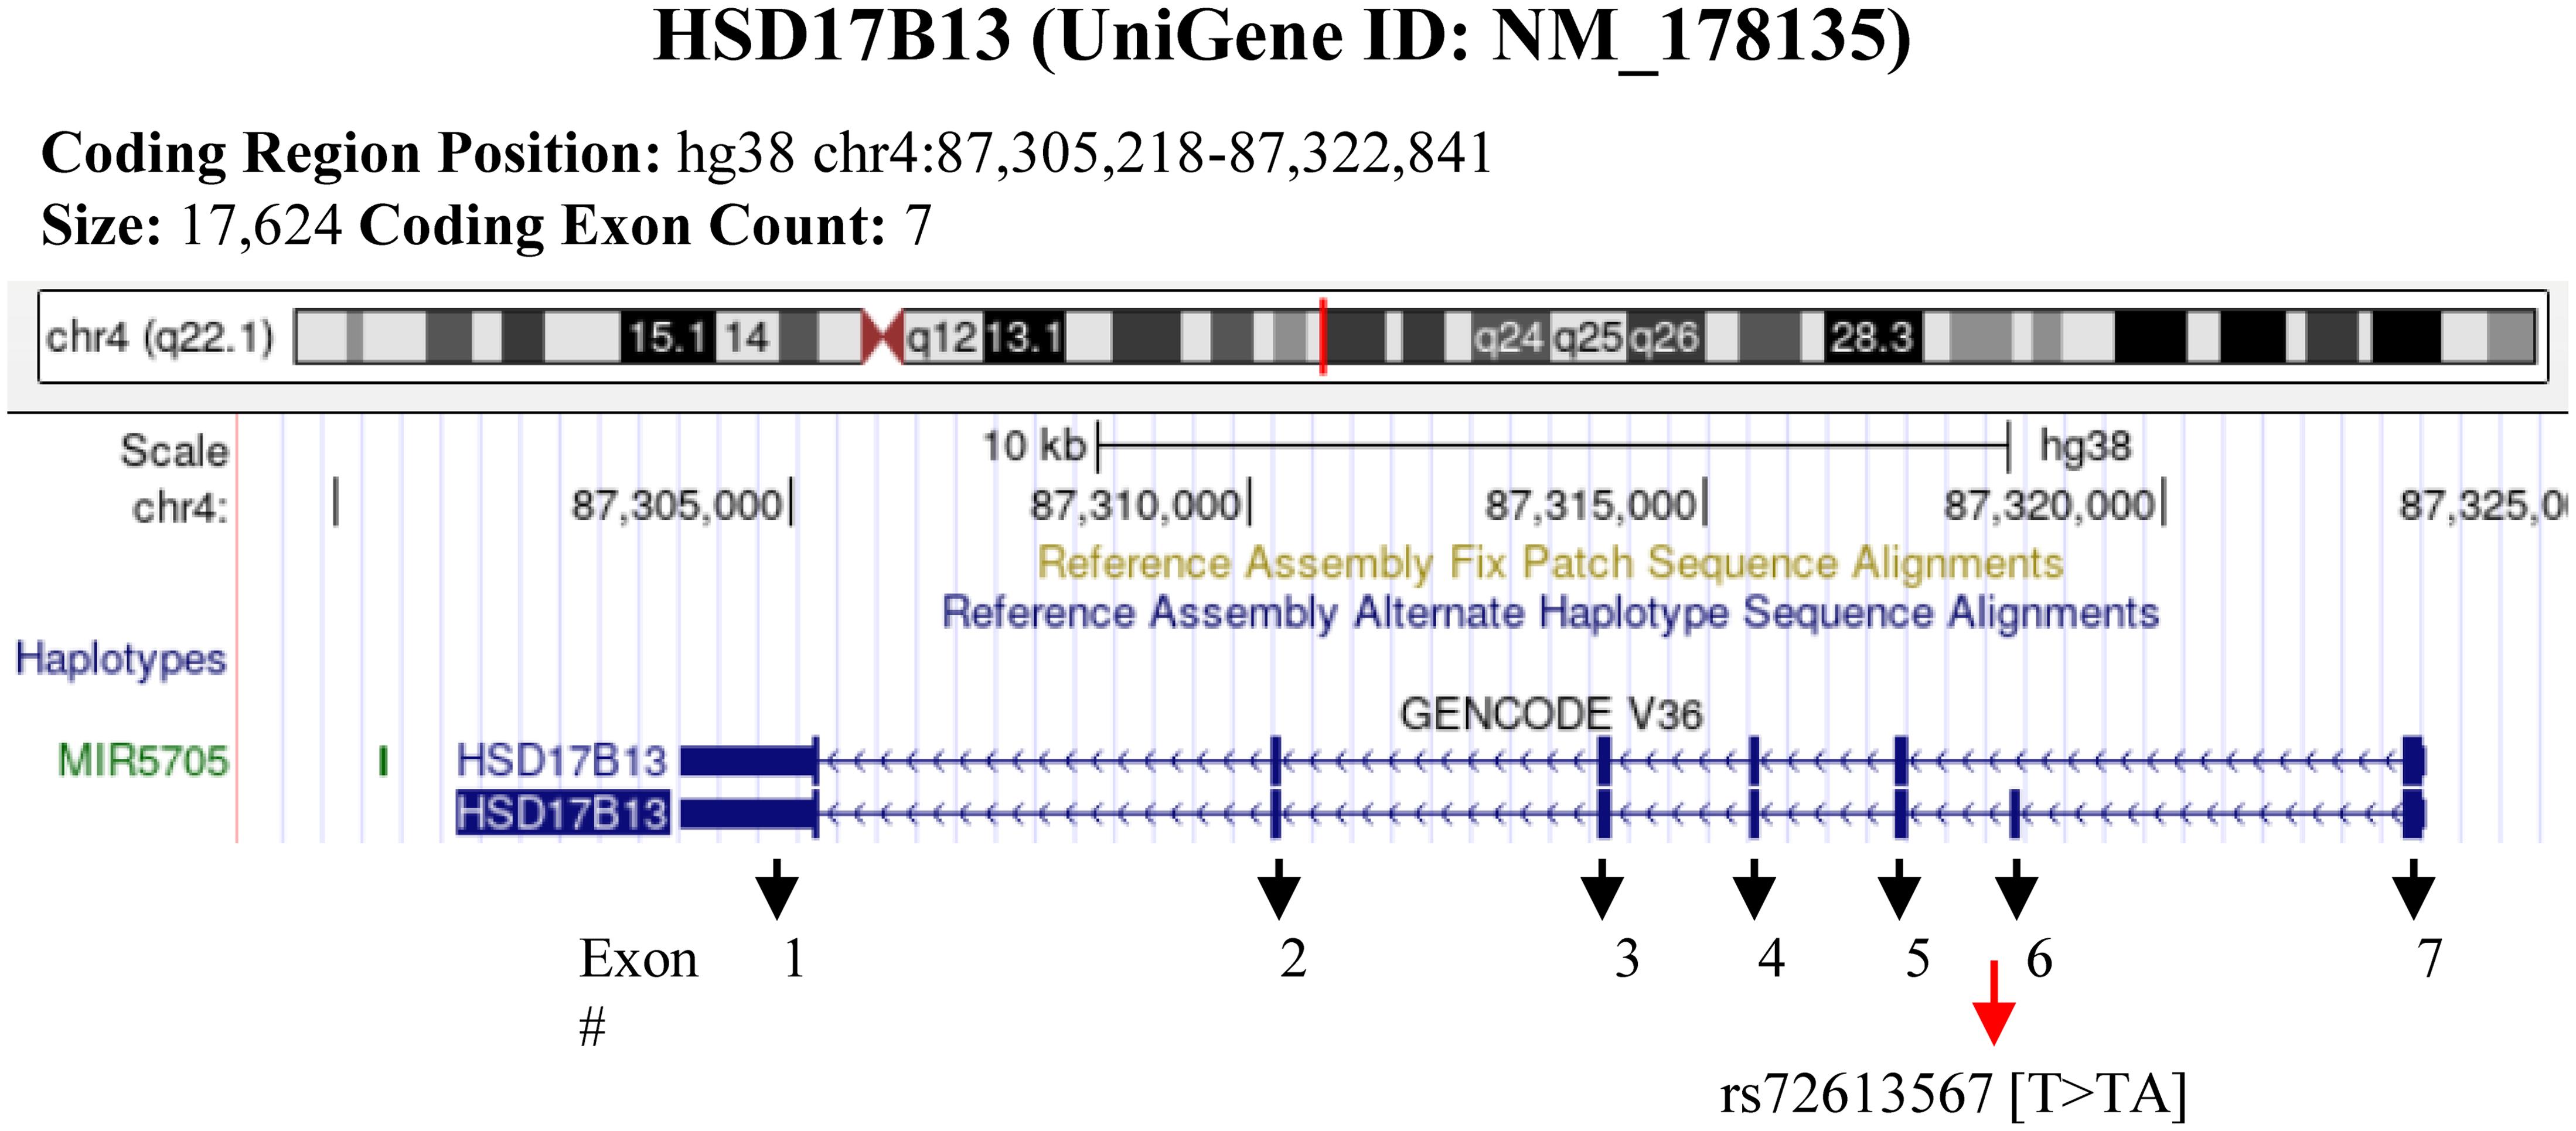 HSD17B13 gene locus showing the rs72613567 polymorphism.